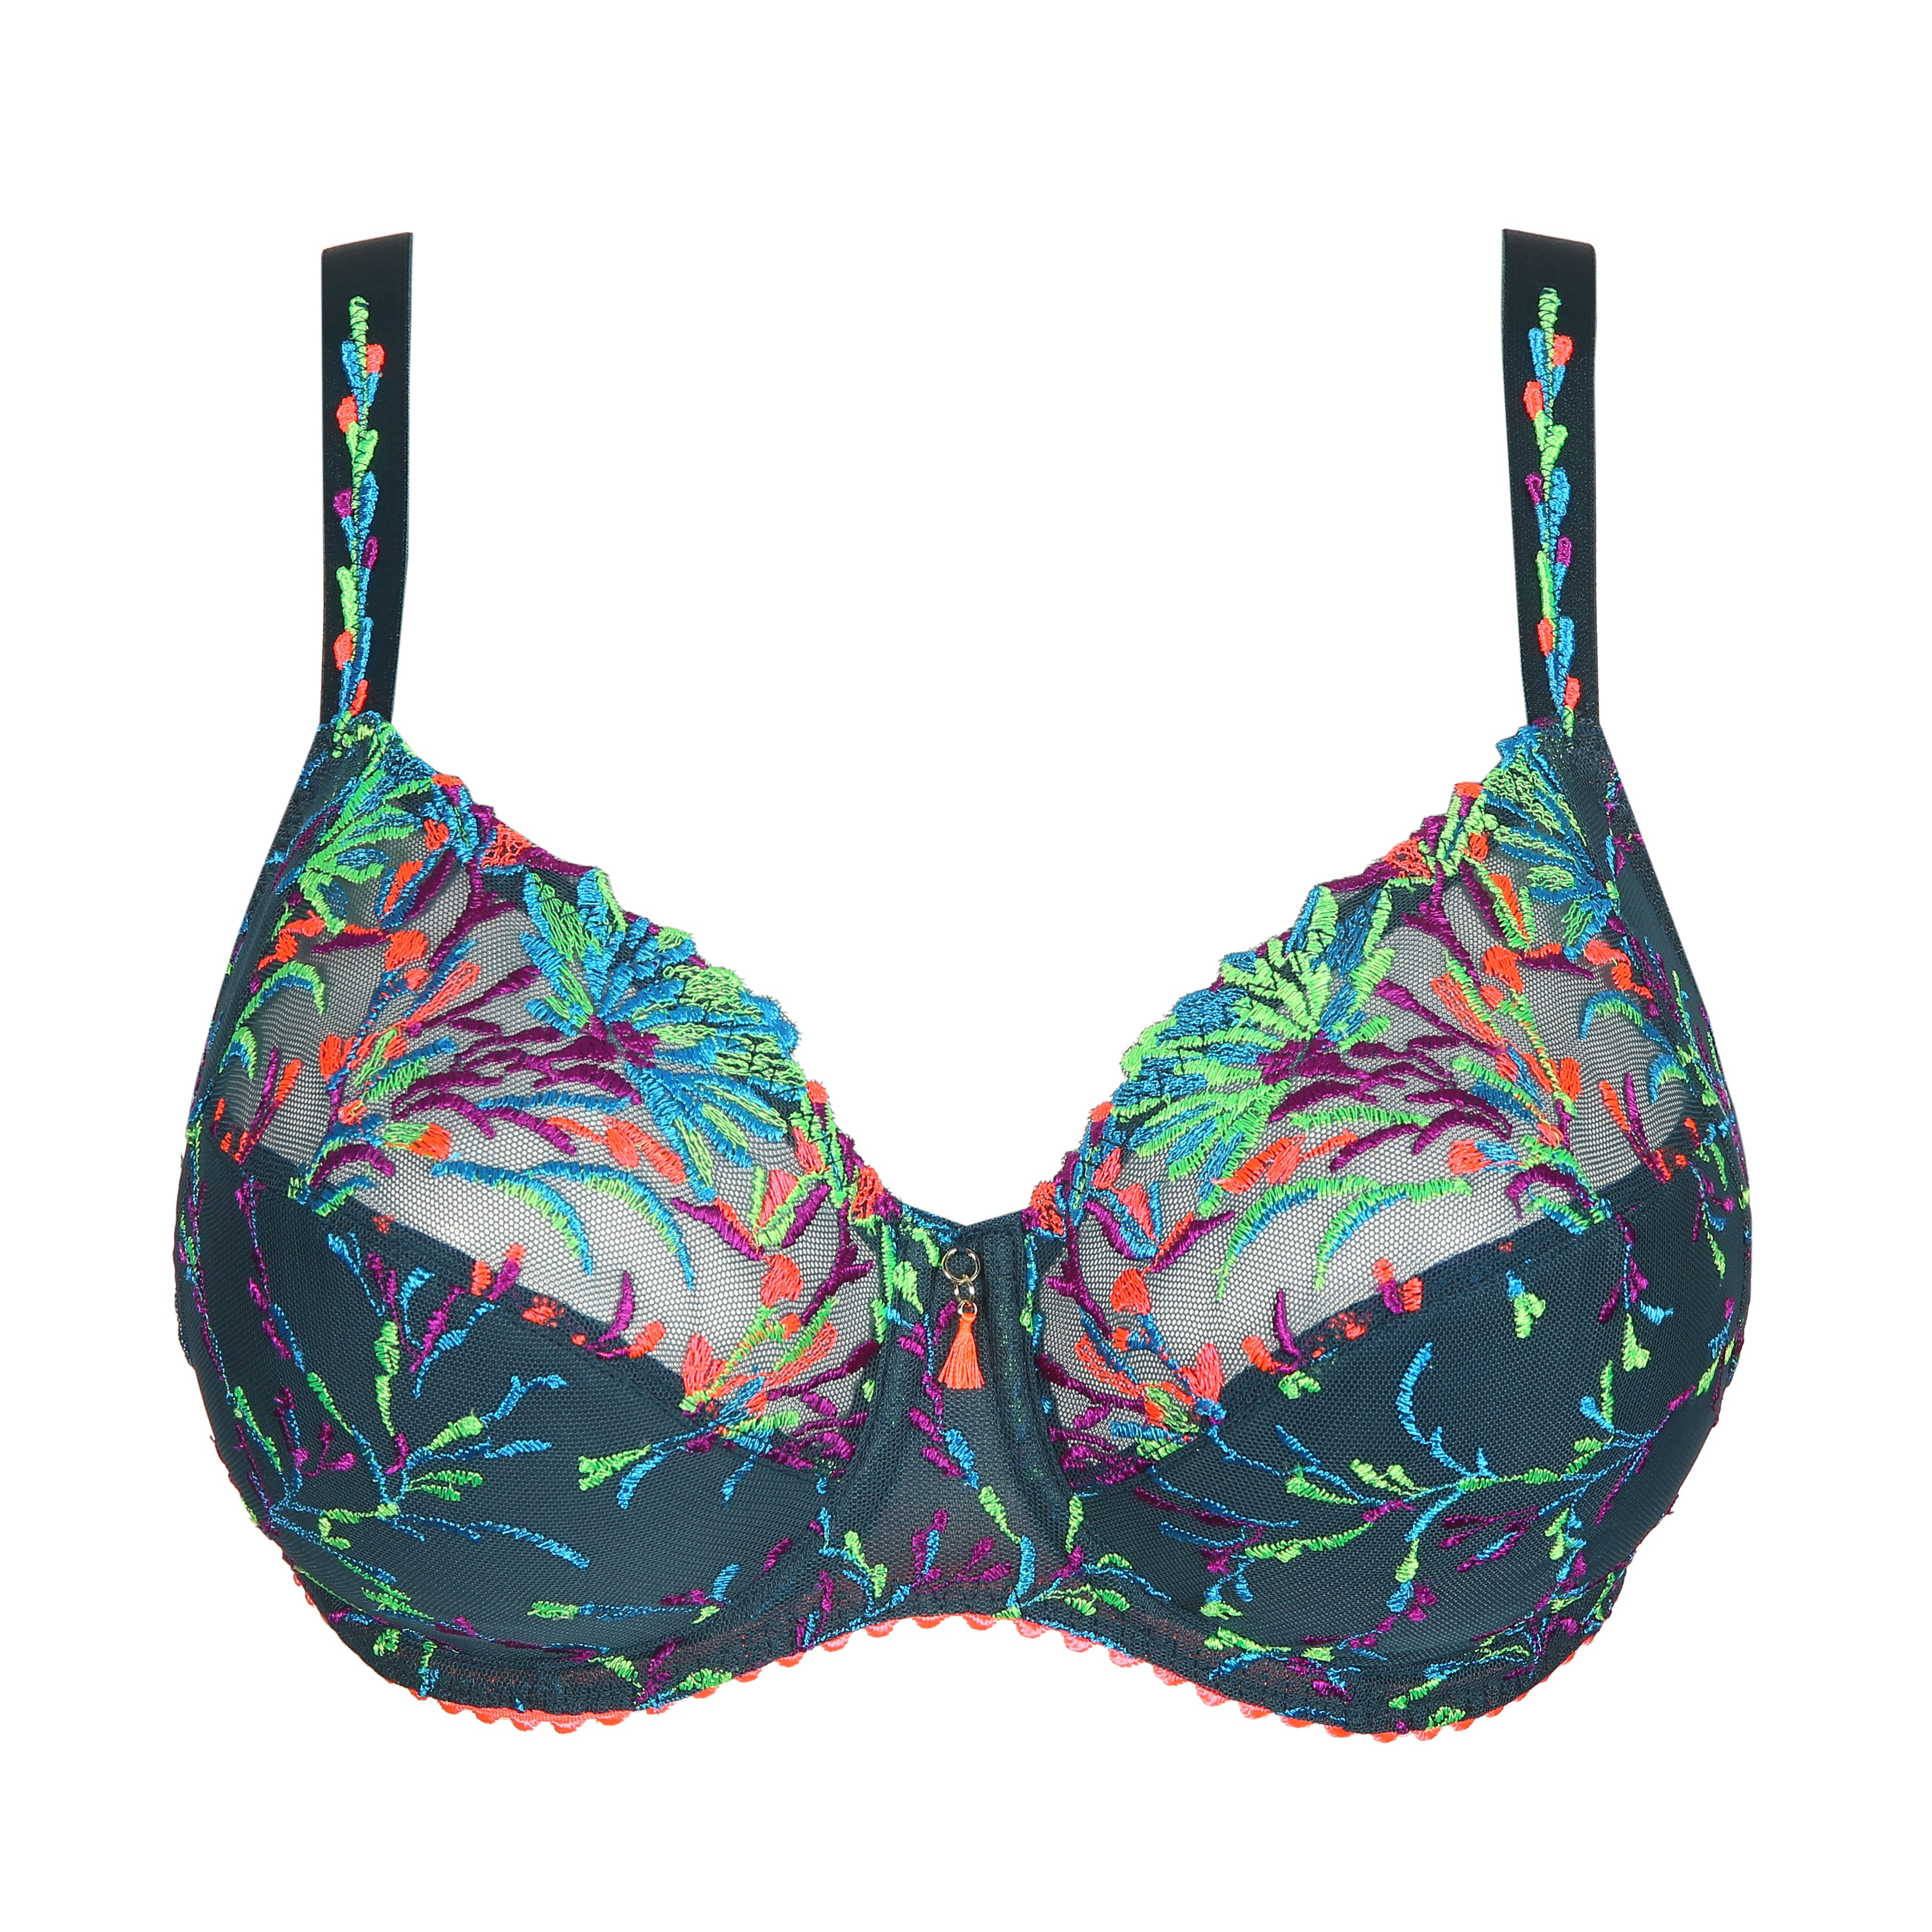 Prima Donna Full Cup Wire - Las Salinas in Empire Green (Limited